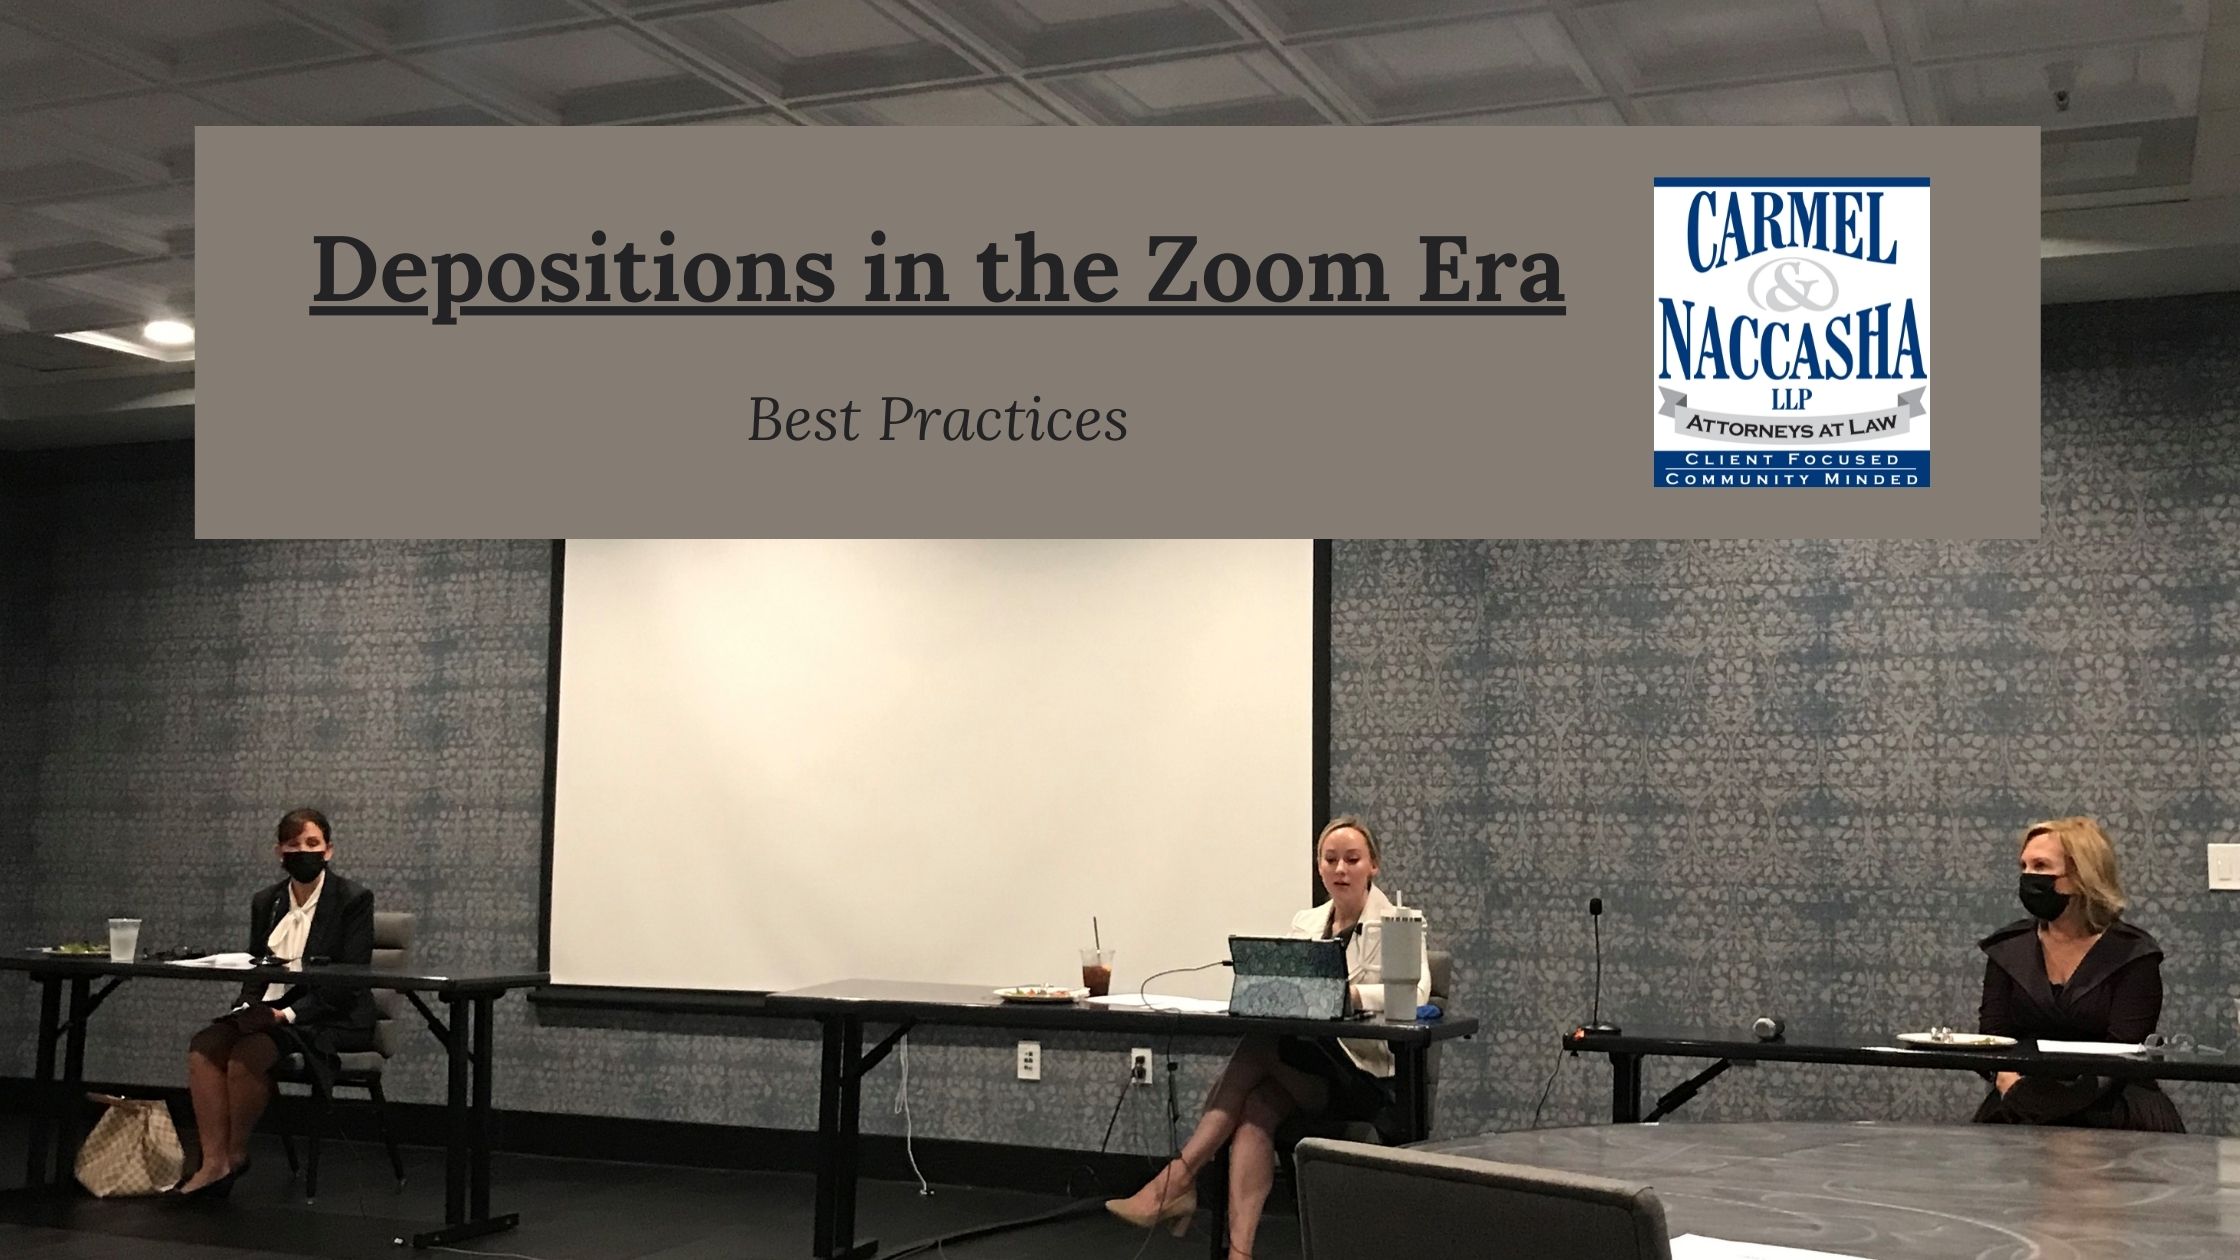 Depositions in the Zoom Era